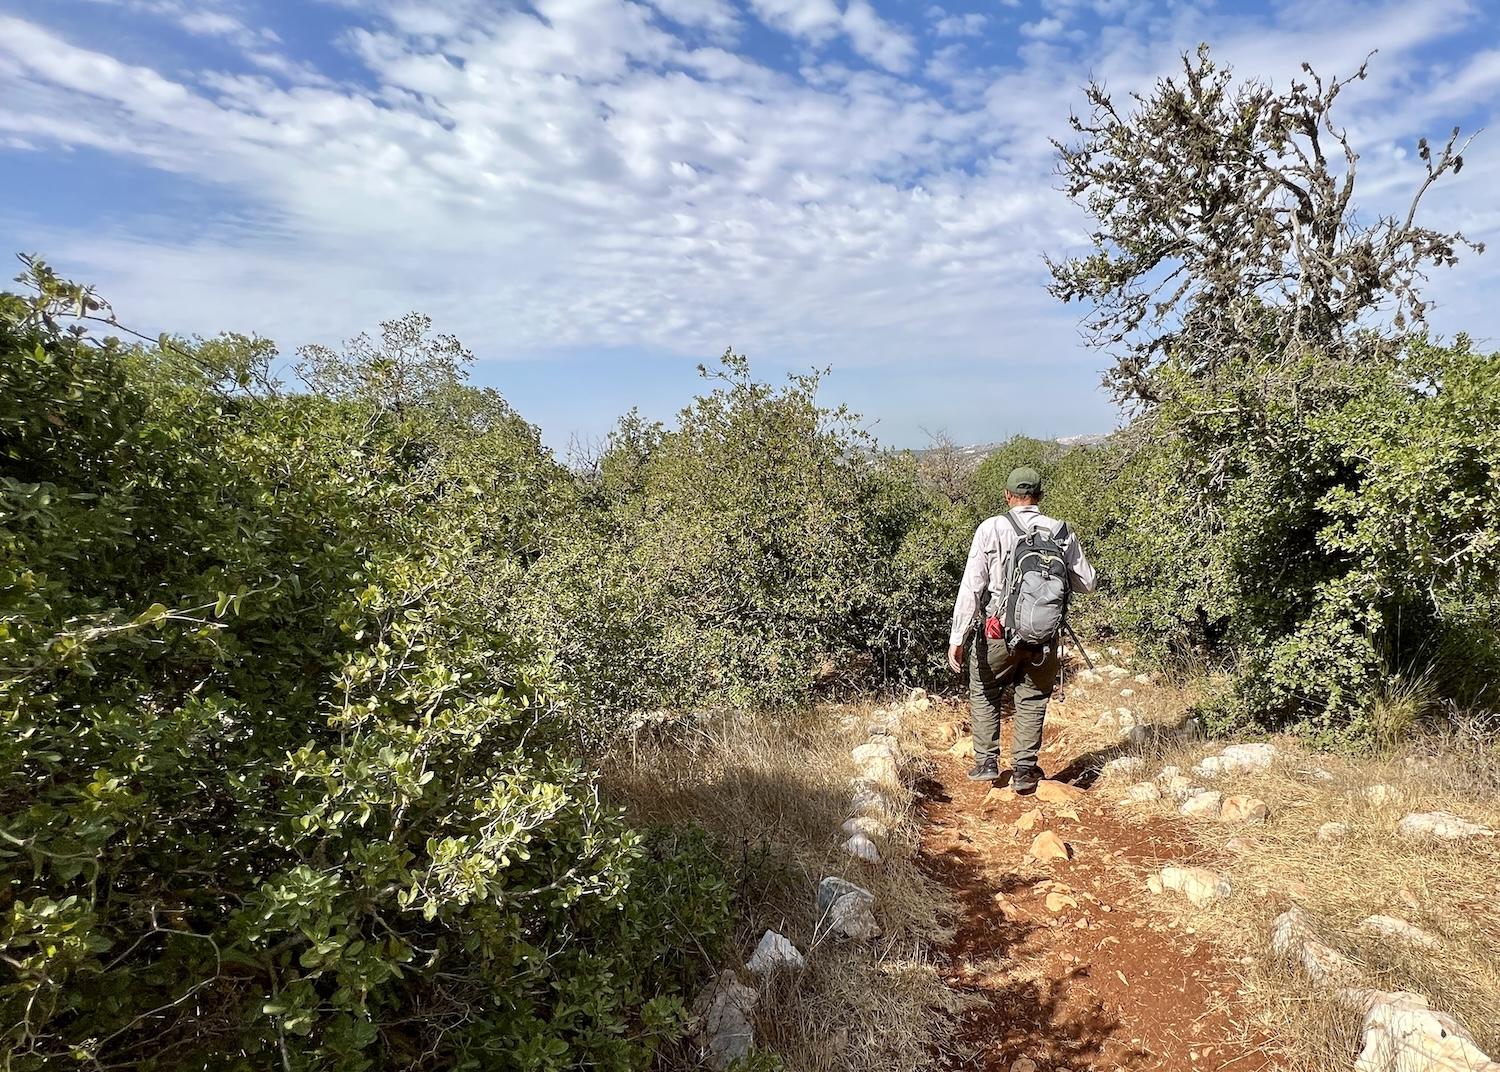 In a country dominated by desert, Jordan's Ajloun Forest Reserve stands out for protecting open woodlands.